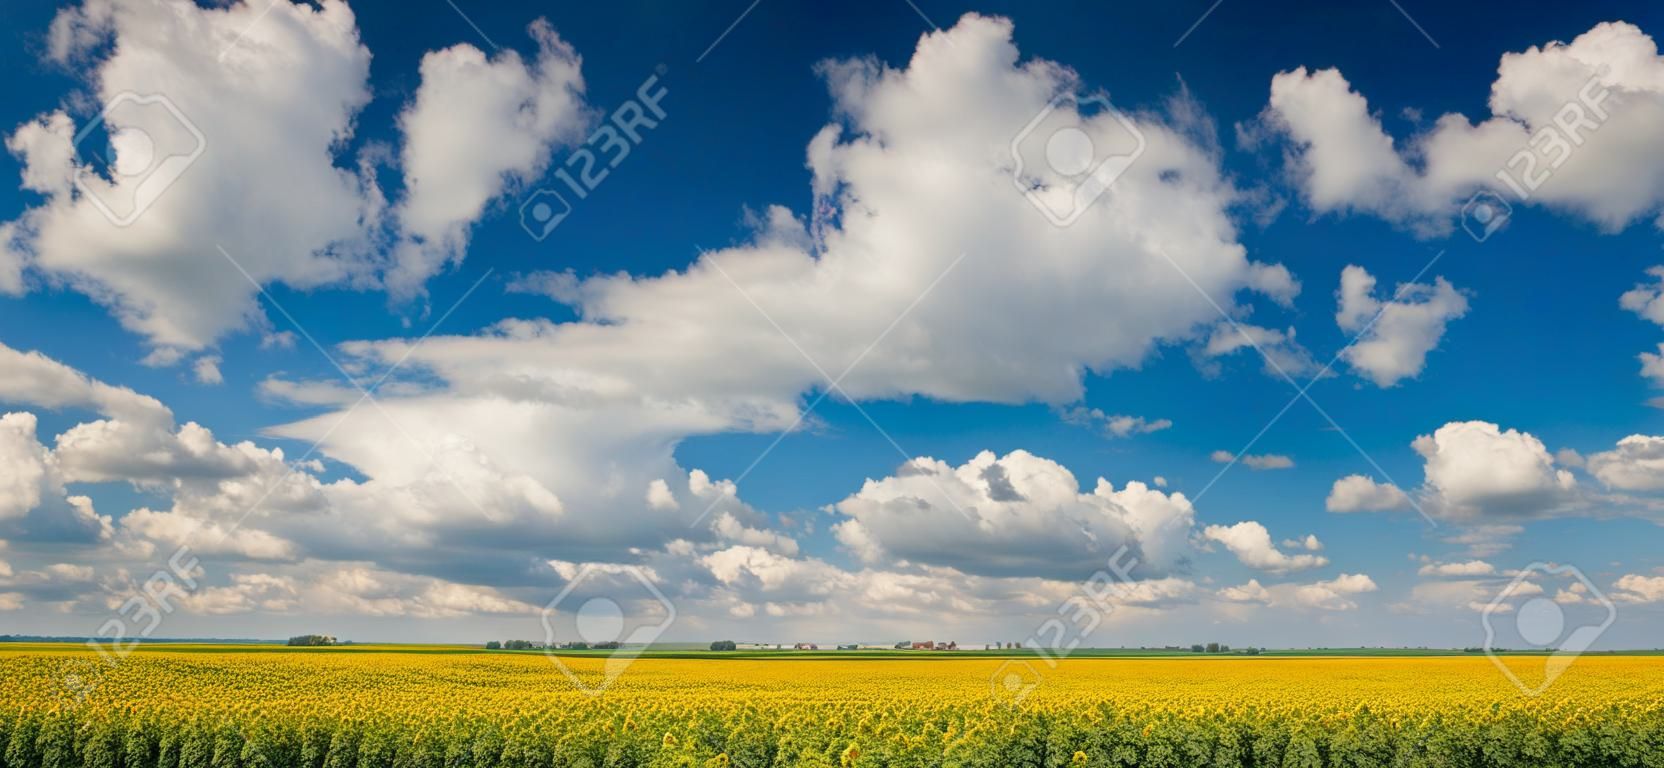 Blue sky with cumulus clouds over a field of sunflowers